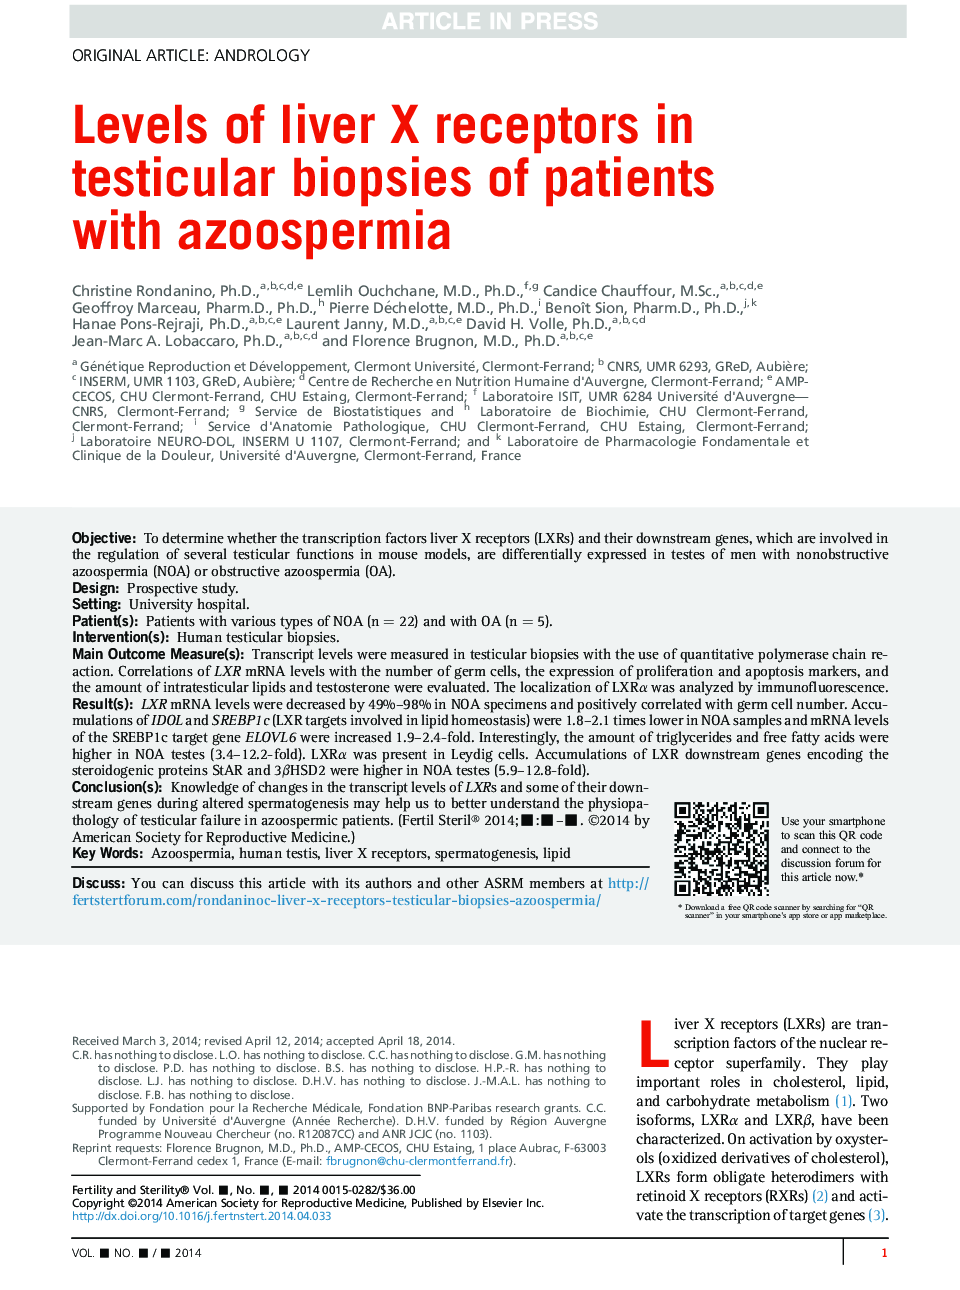 Levels of liver X receptors in testicular biopsies of patients with azoospermia